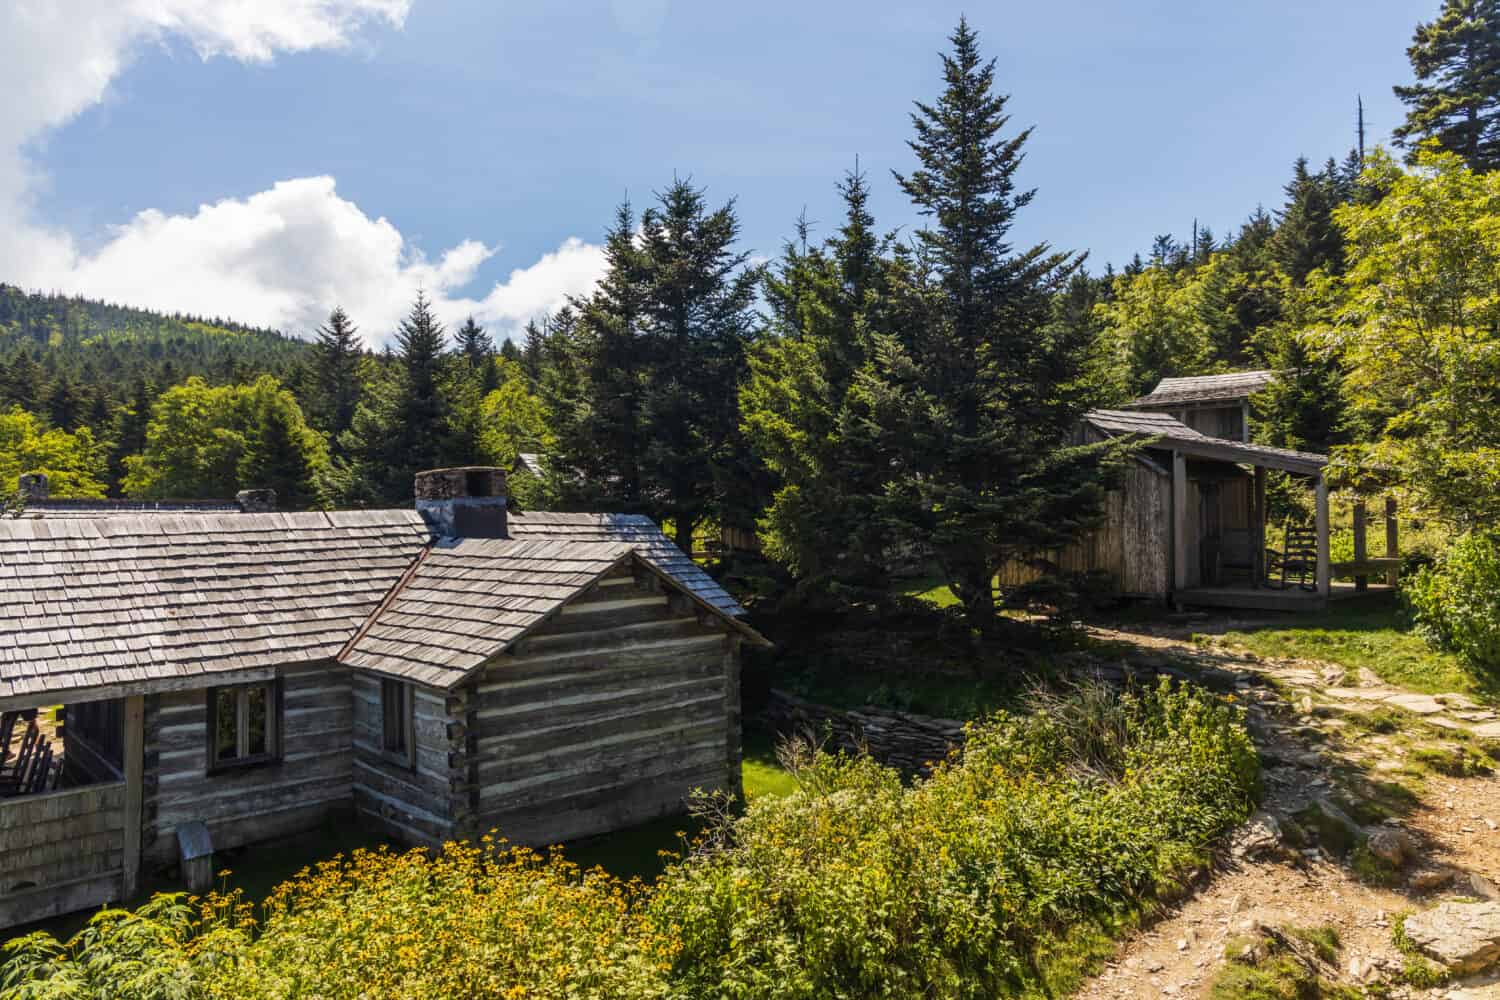 Cabins at LeConte Lodge, Great Smoky Mountains National Park